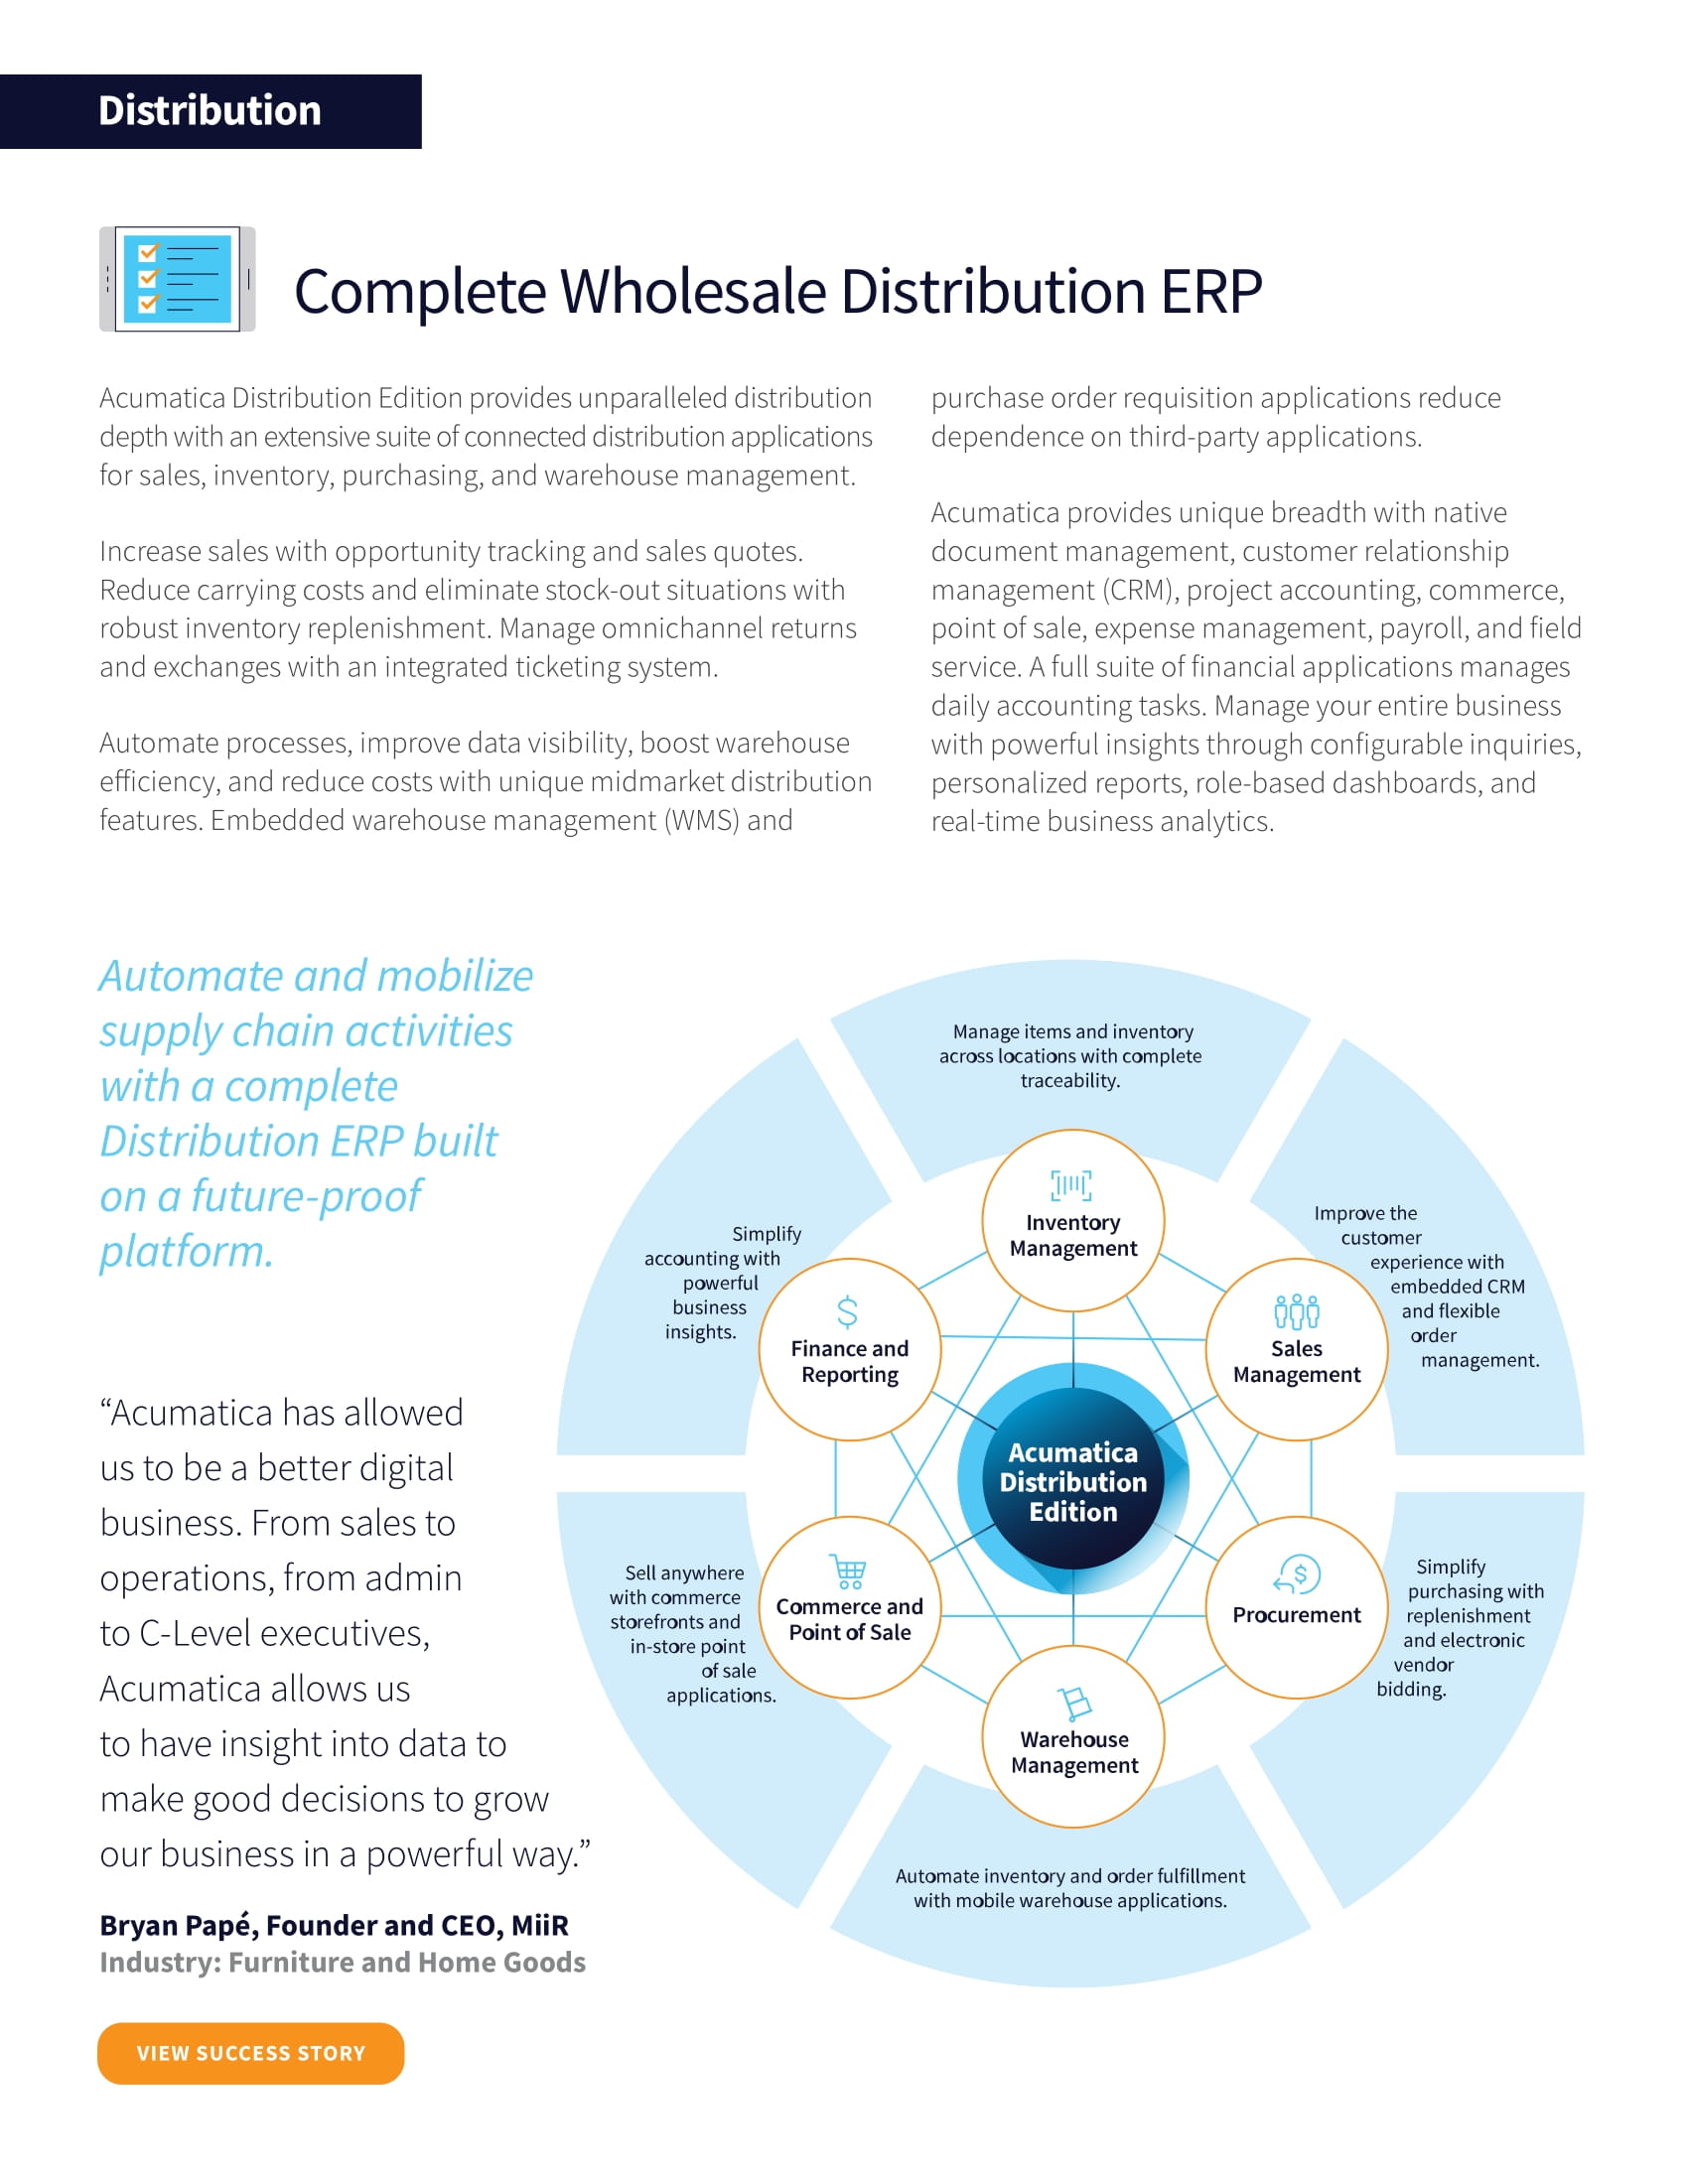 Distribution ERP: Find the Best Blend of Functionality and Simplicity, page 1